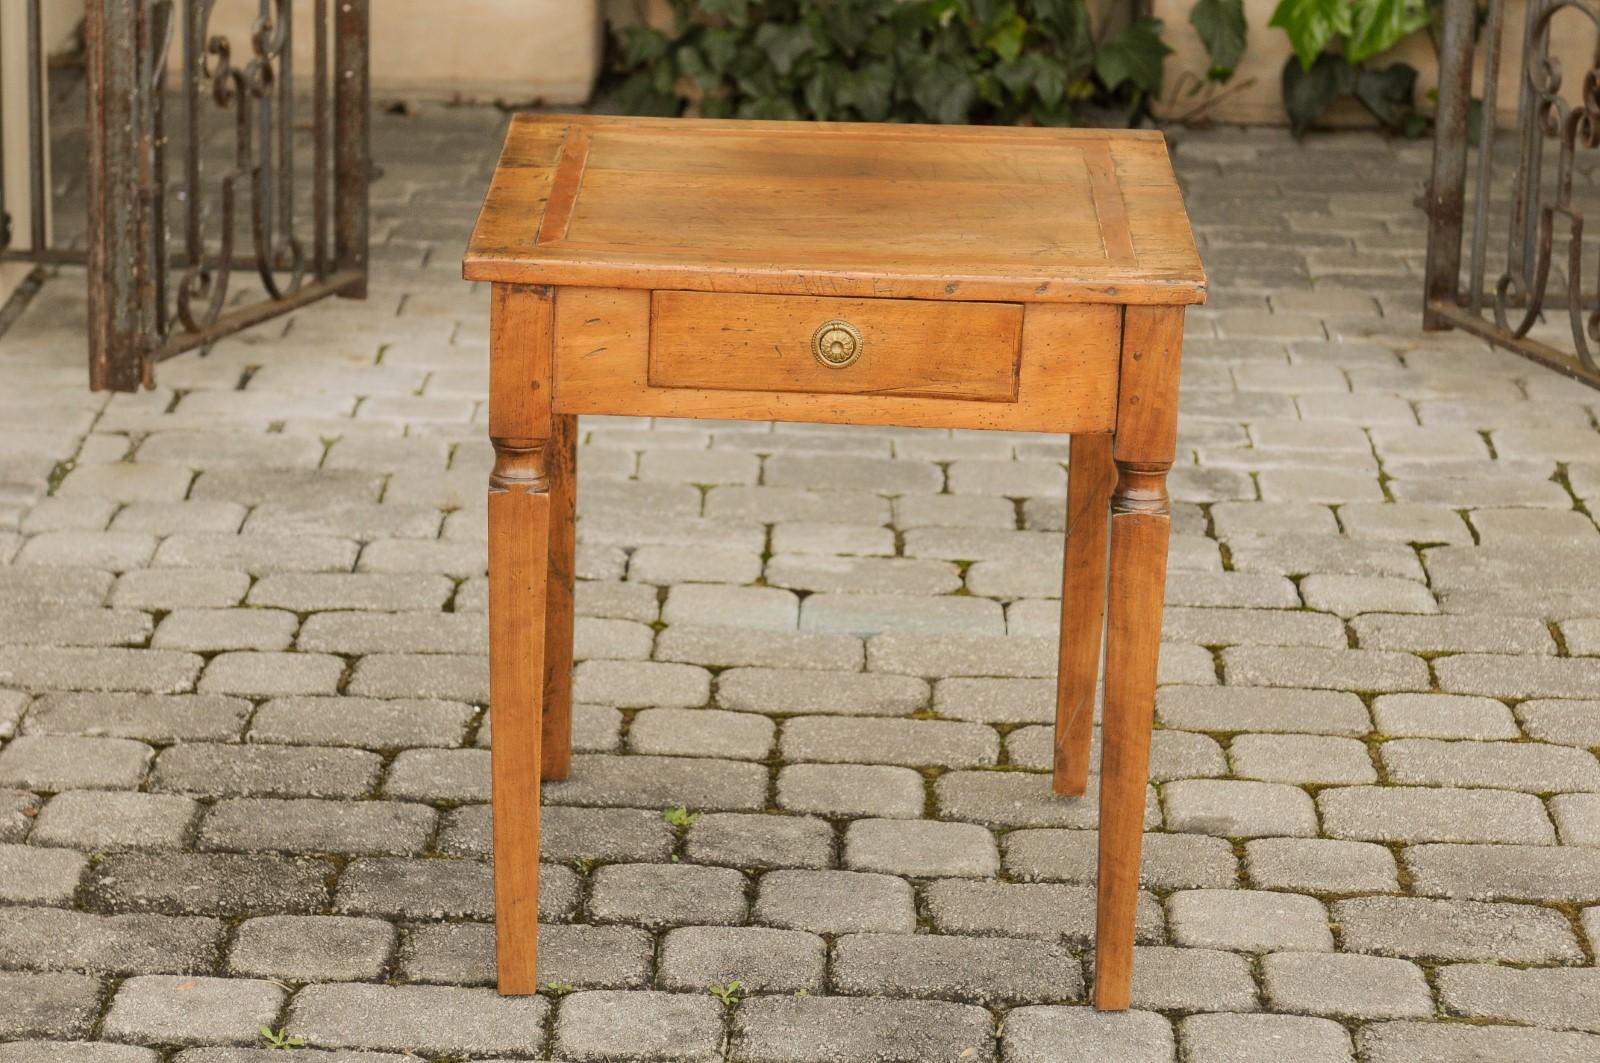 An Italian walnut neoclassical period side table from the early 19th century, with single drawer and tapered legs. Born in Italy during the second decade of the 19th century, this lovely walnut side table features a near square top, inlaid with a